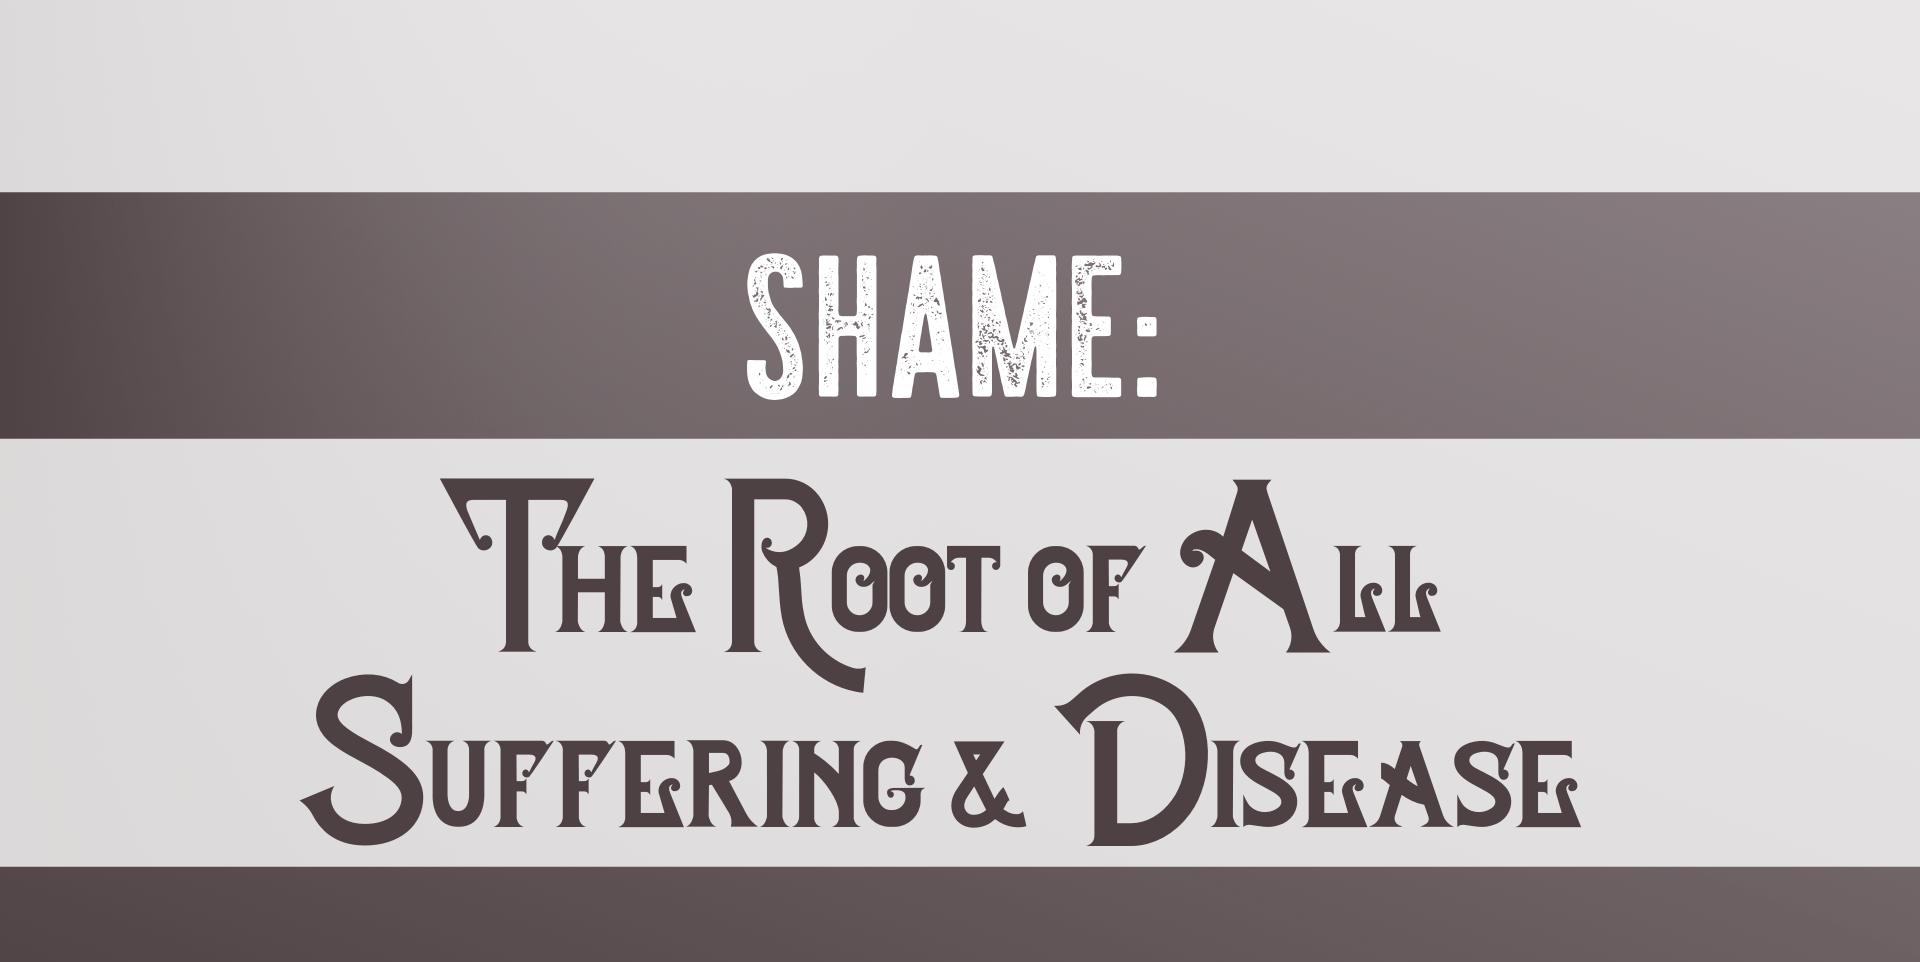 Shame is the root of all suffering